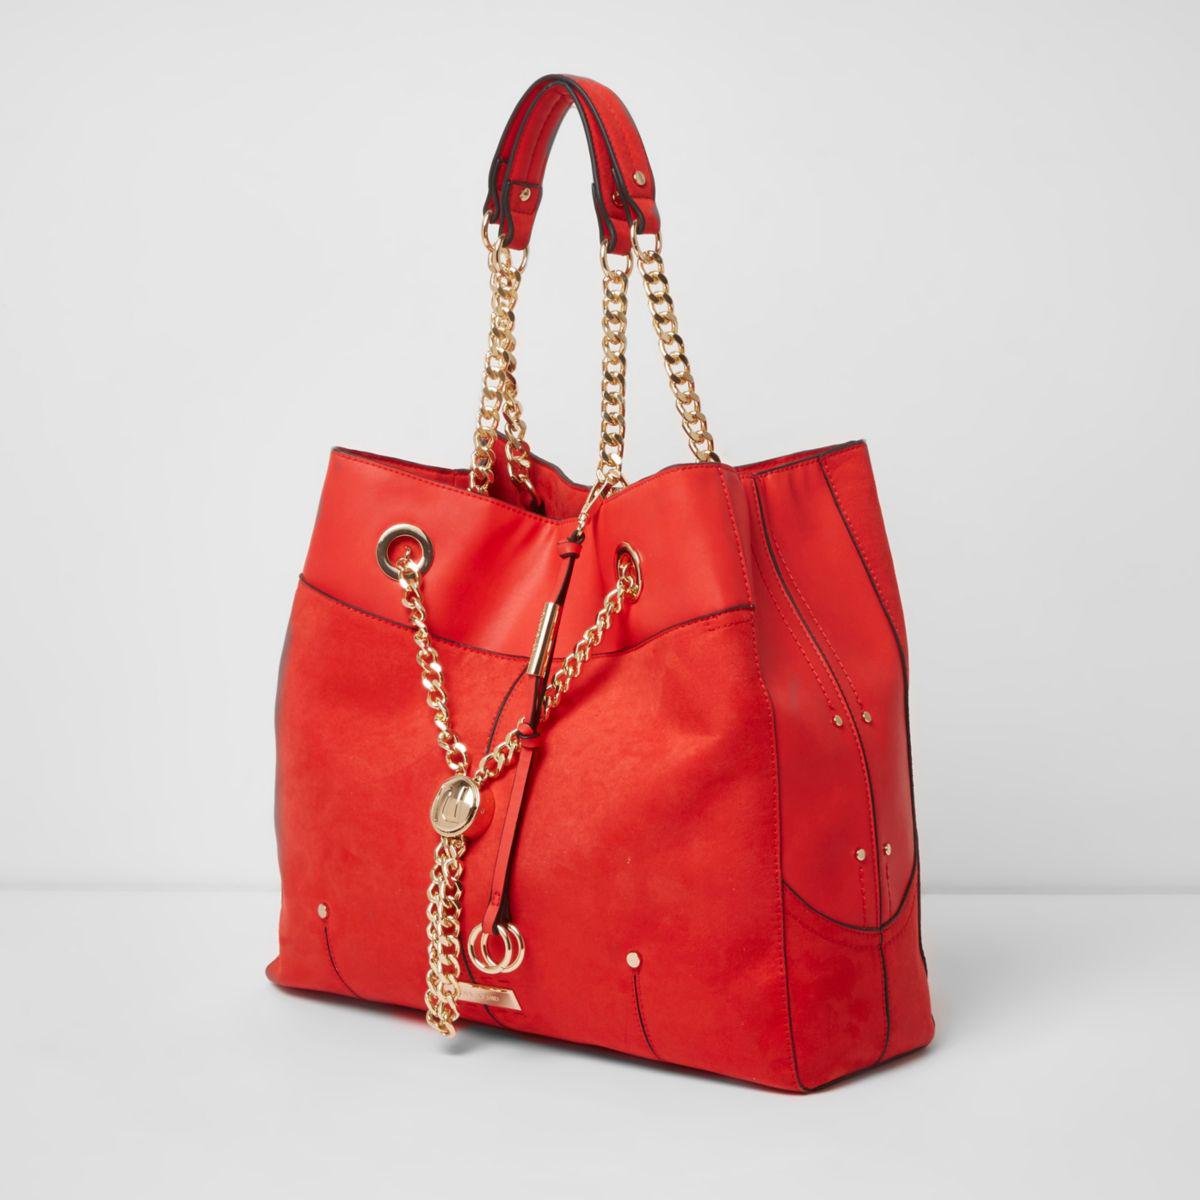 River Island Synthetic Chain Front Tote Bag in Red - Lyst